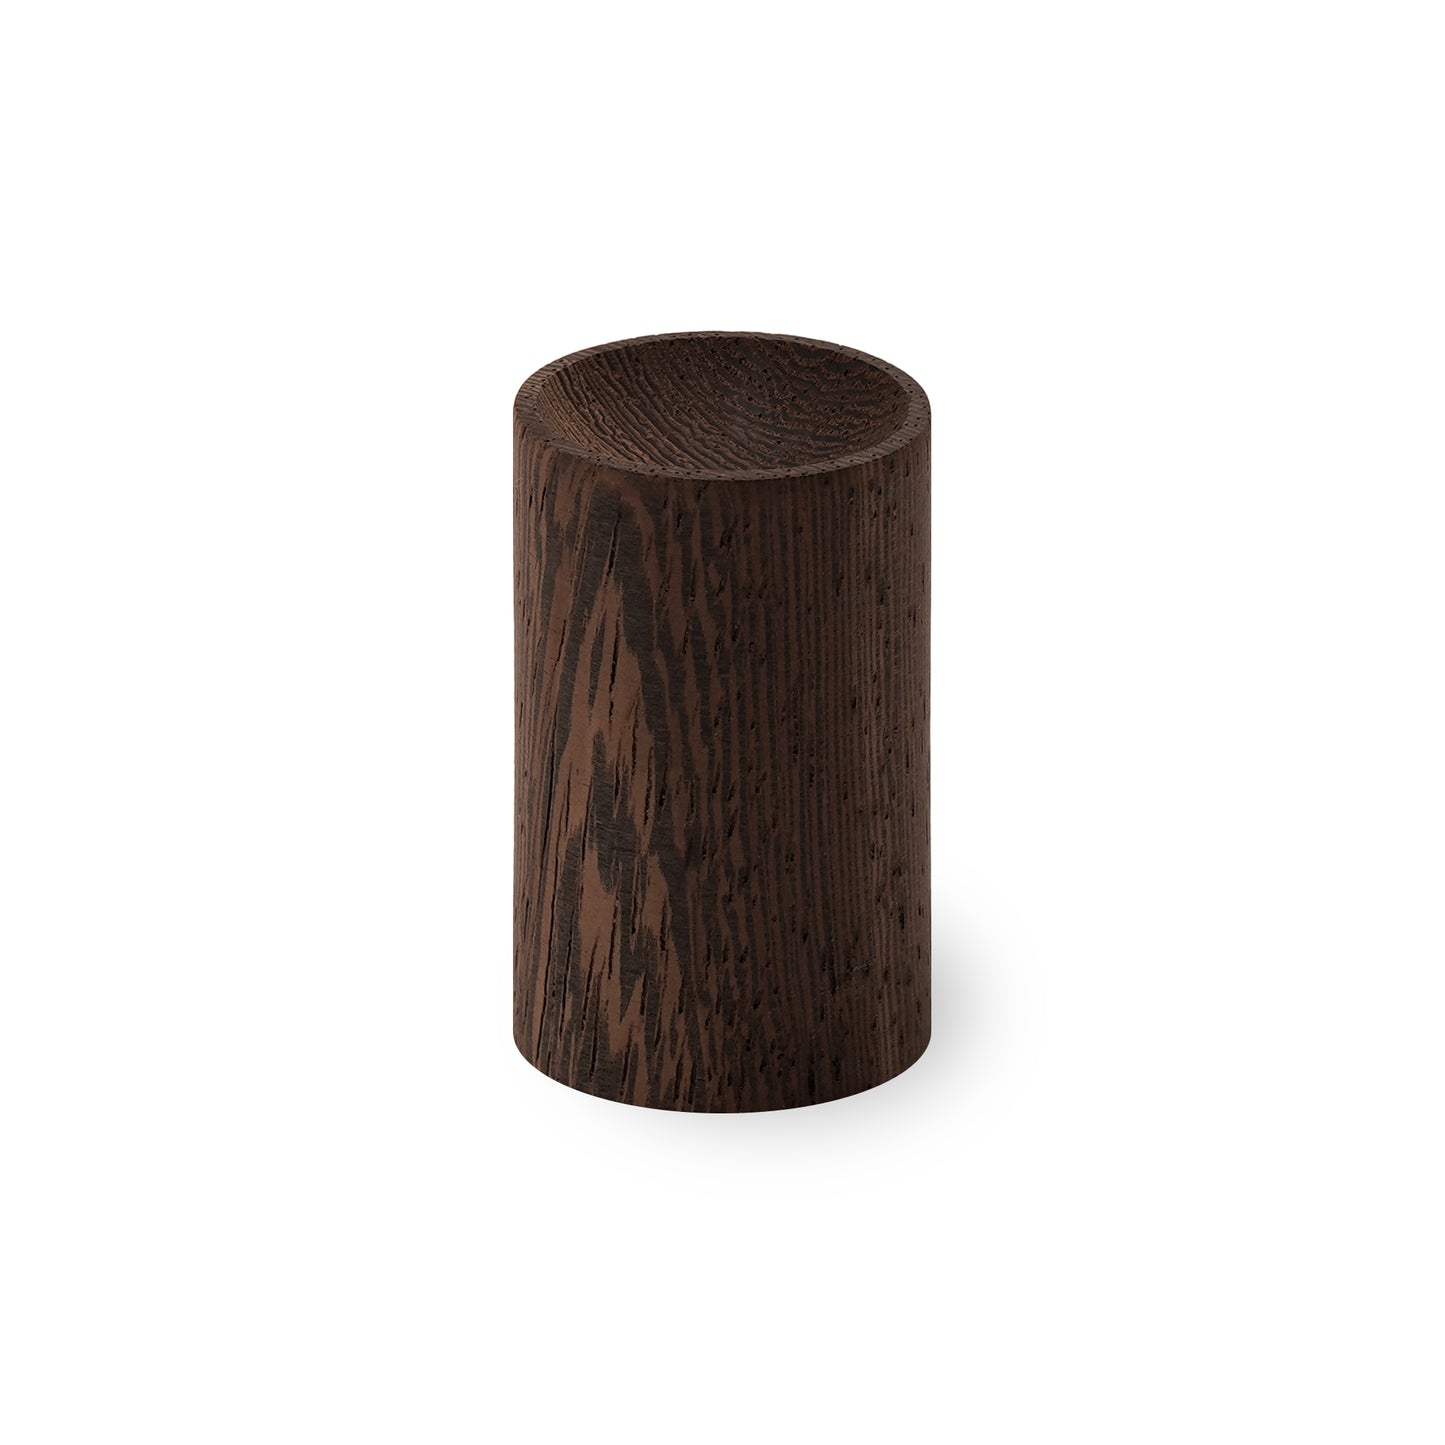 Cylindrical wood diffuser